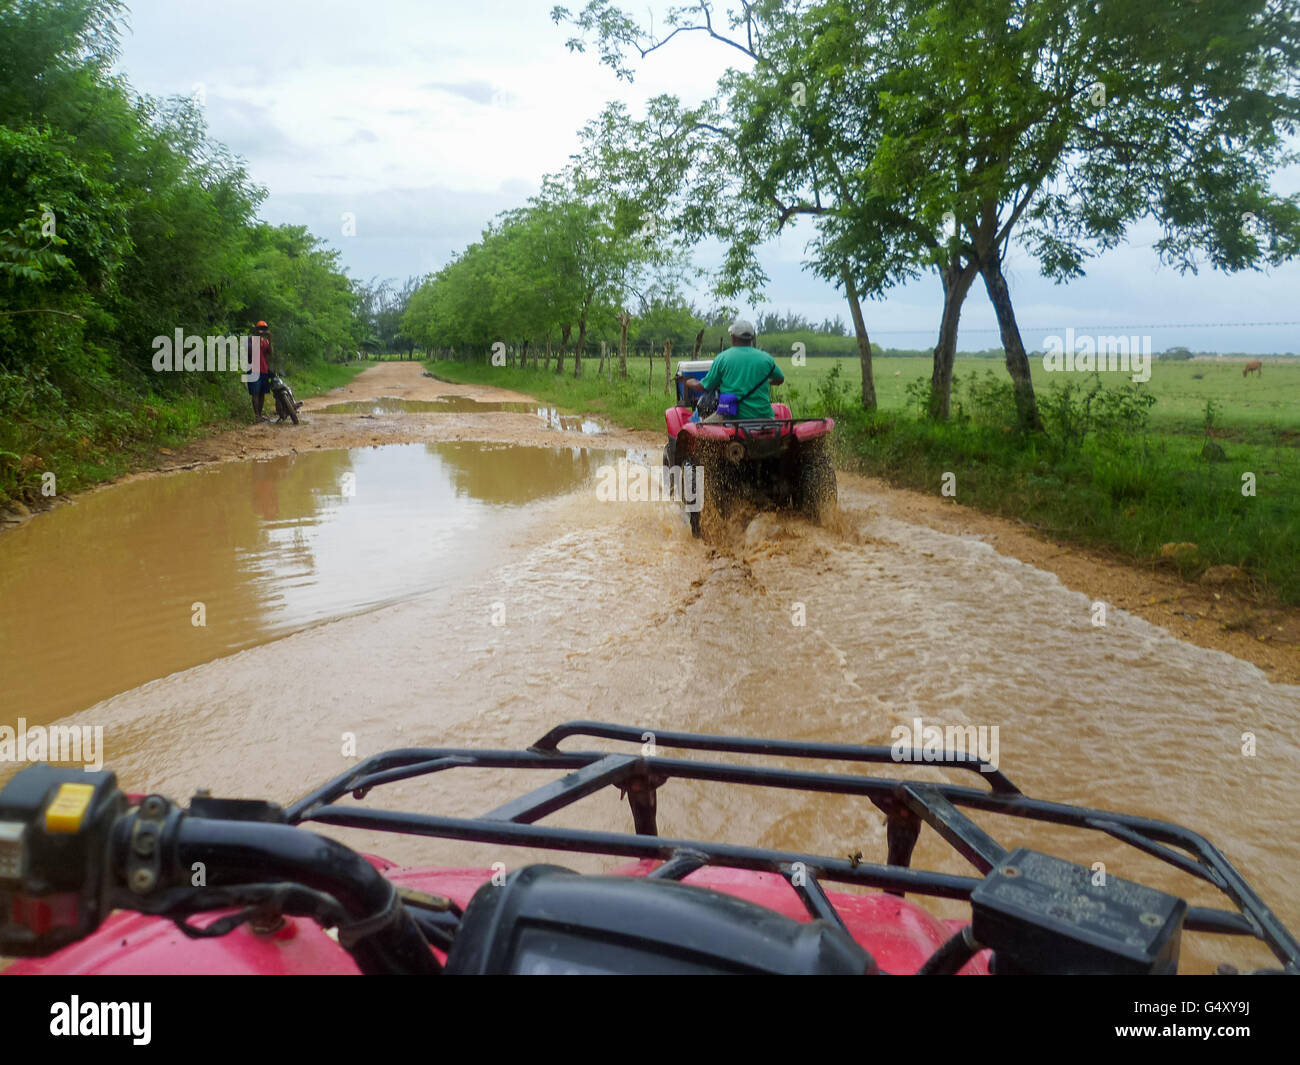 Dominican Republic, La Altagracia, Los Melones, With the quad through the largest puddles Stock Photo